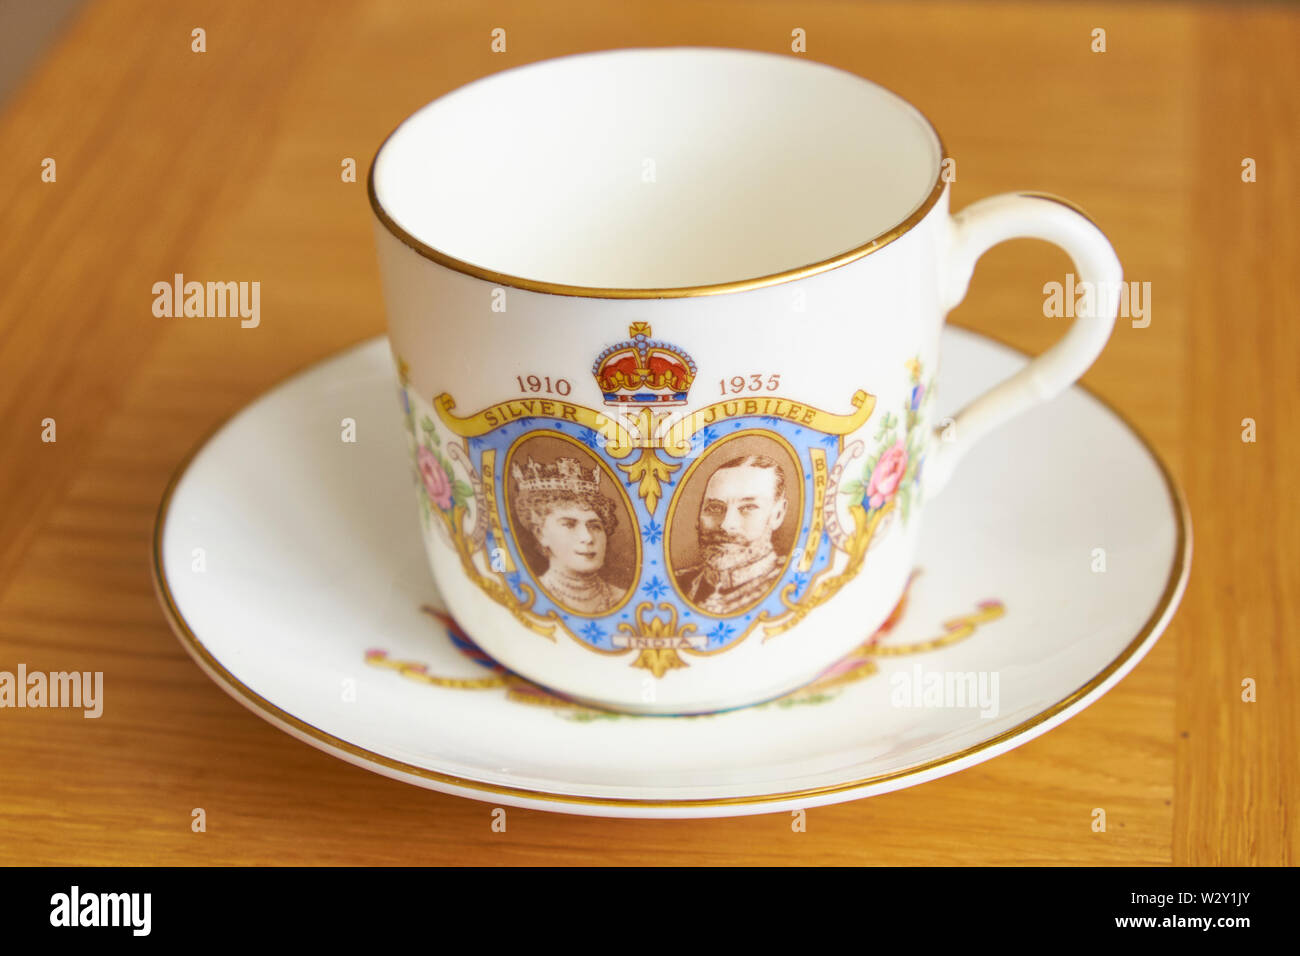 Silver Jubilee 1910 1935 King George V and Queen Mary tea cup and saucer Stock Photo